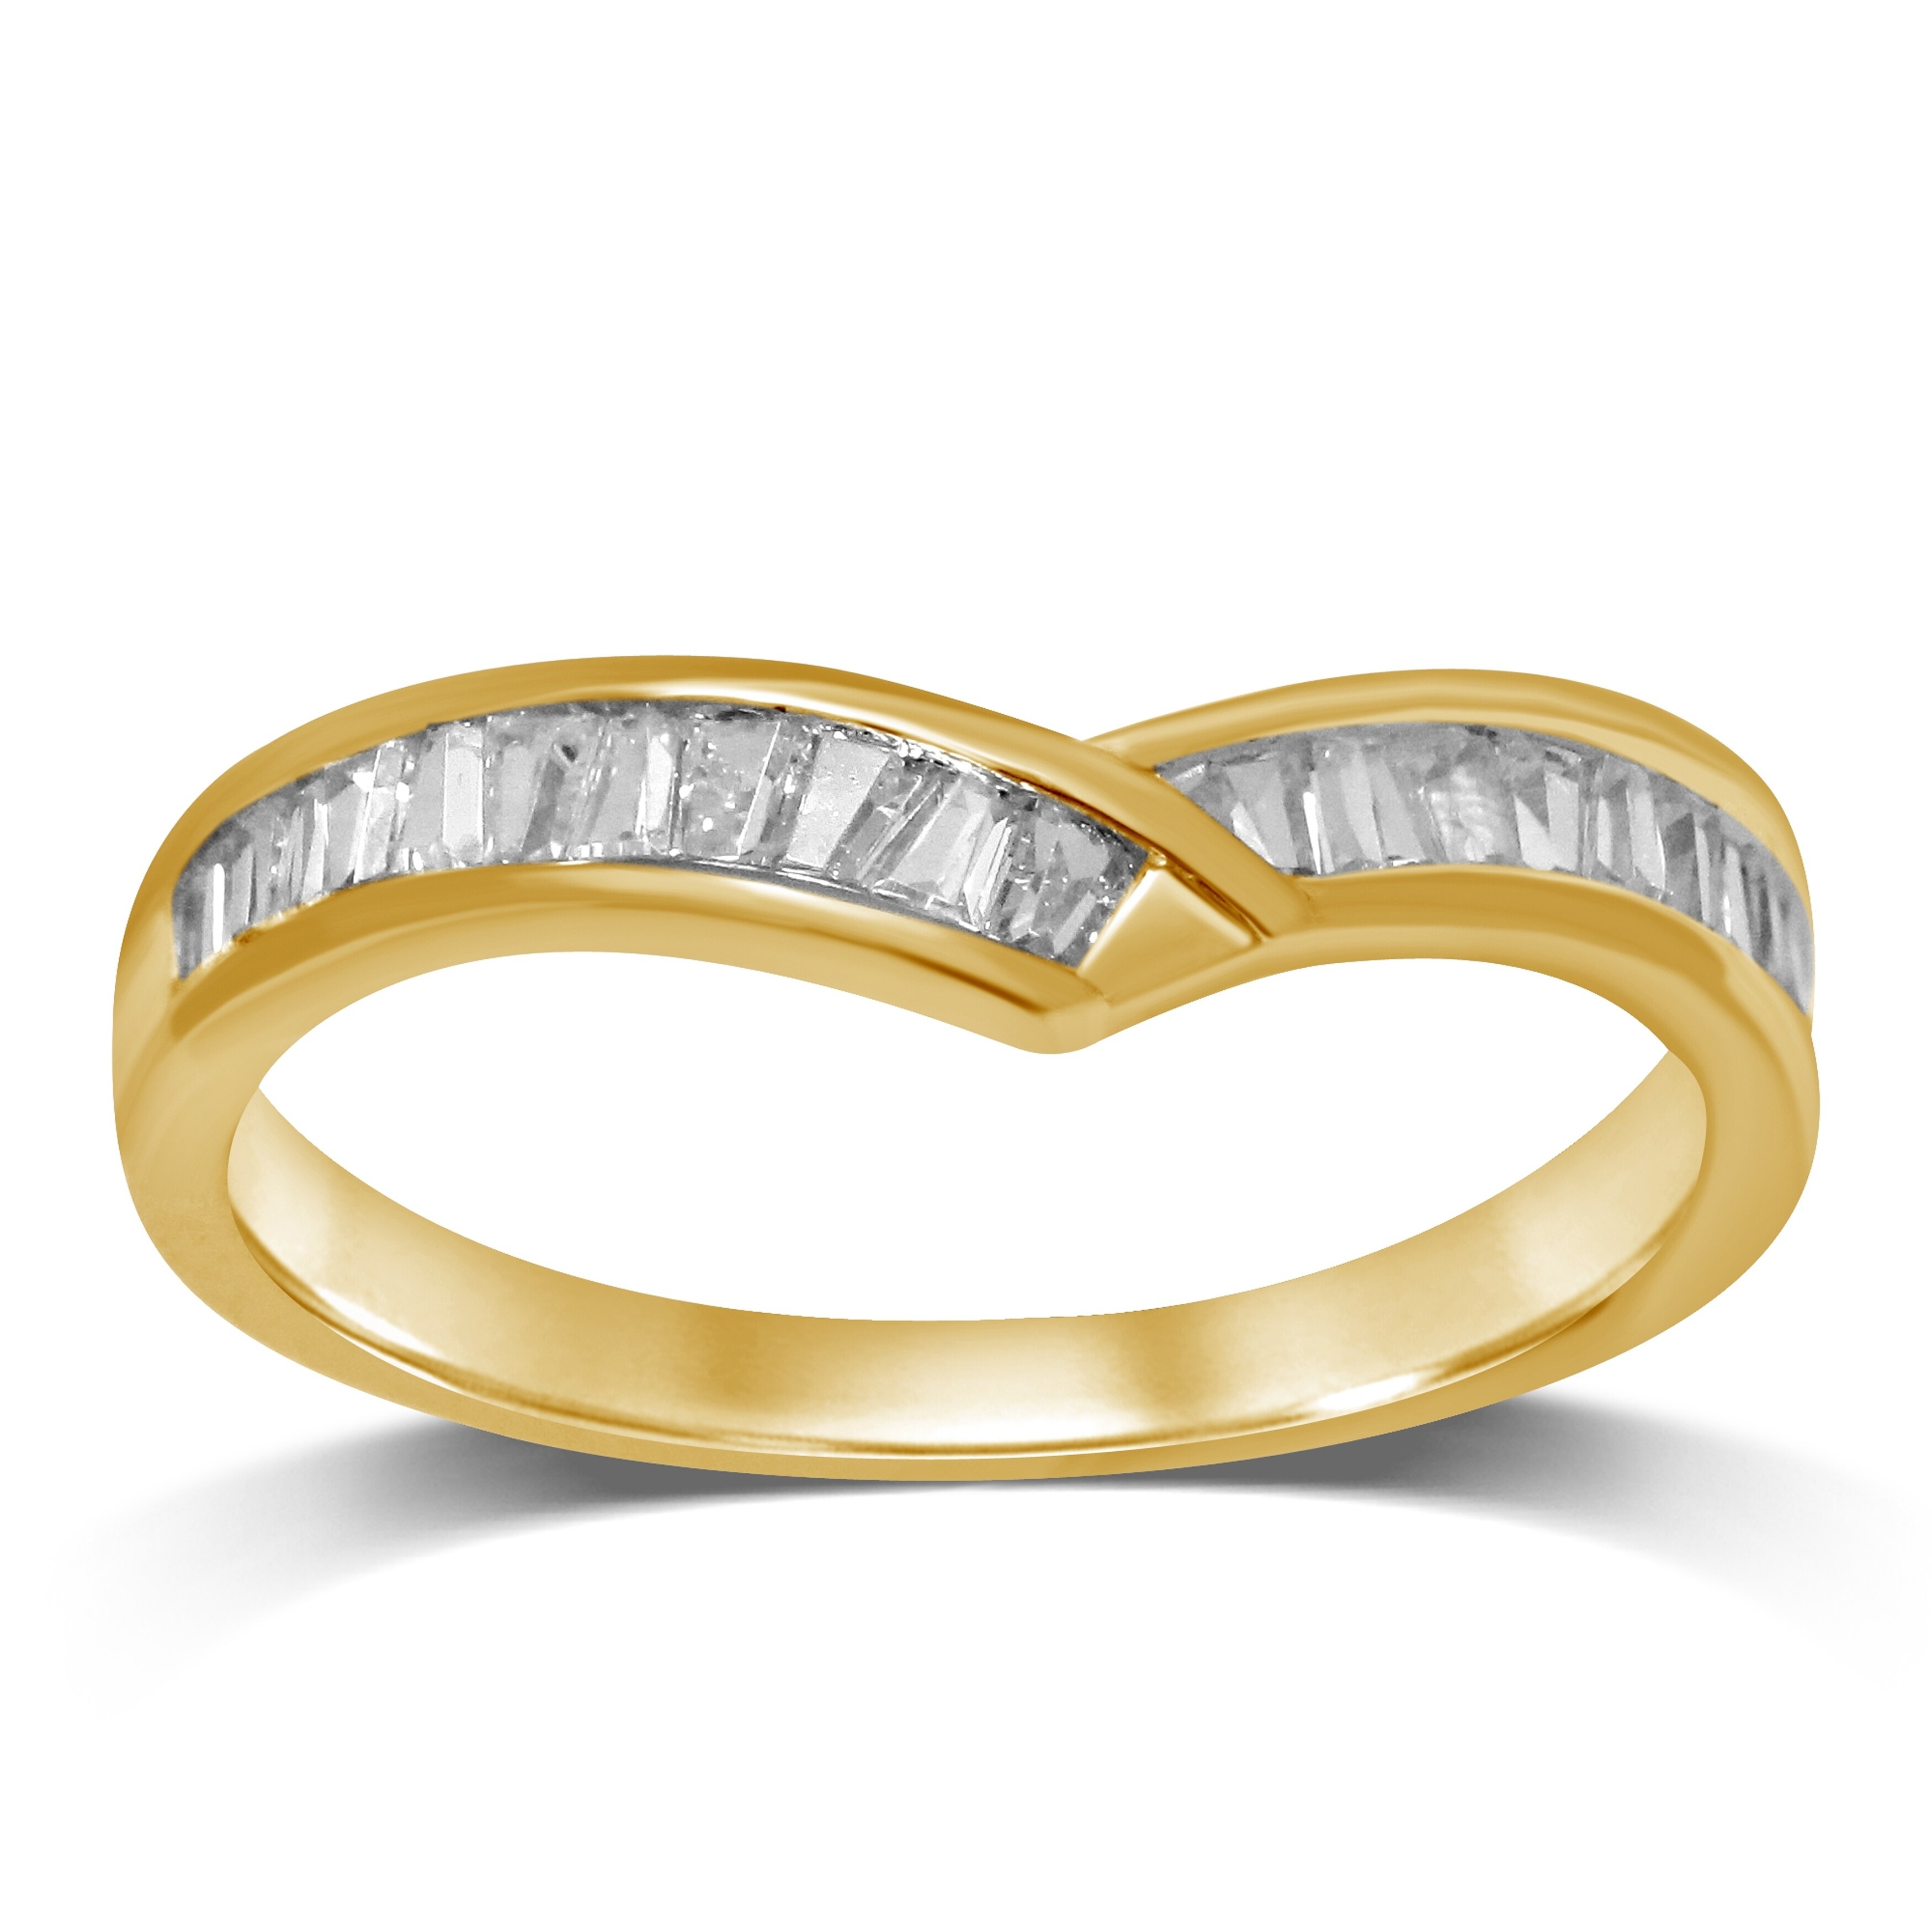 Size-8.75 1/5 cttw, Diamond Wedding Band in 10K Yellow Gold G-H,I2-I3